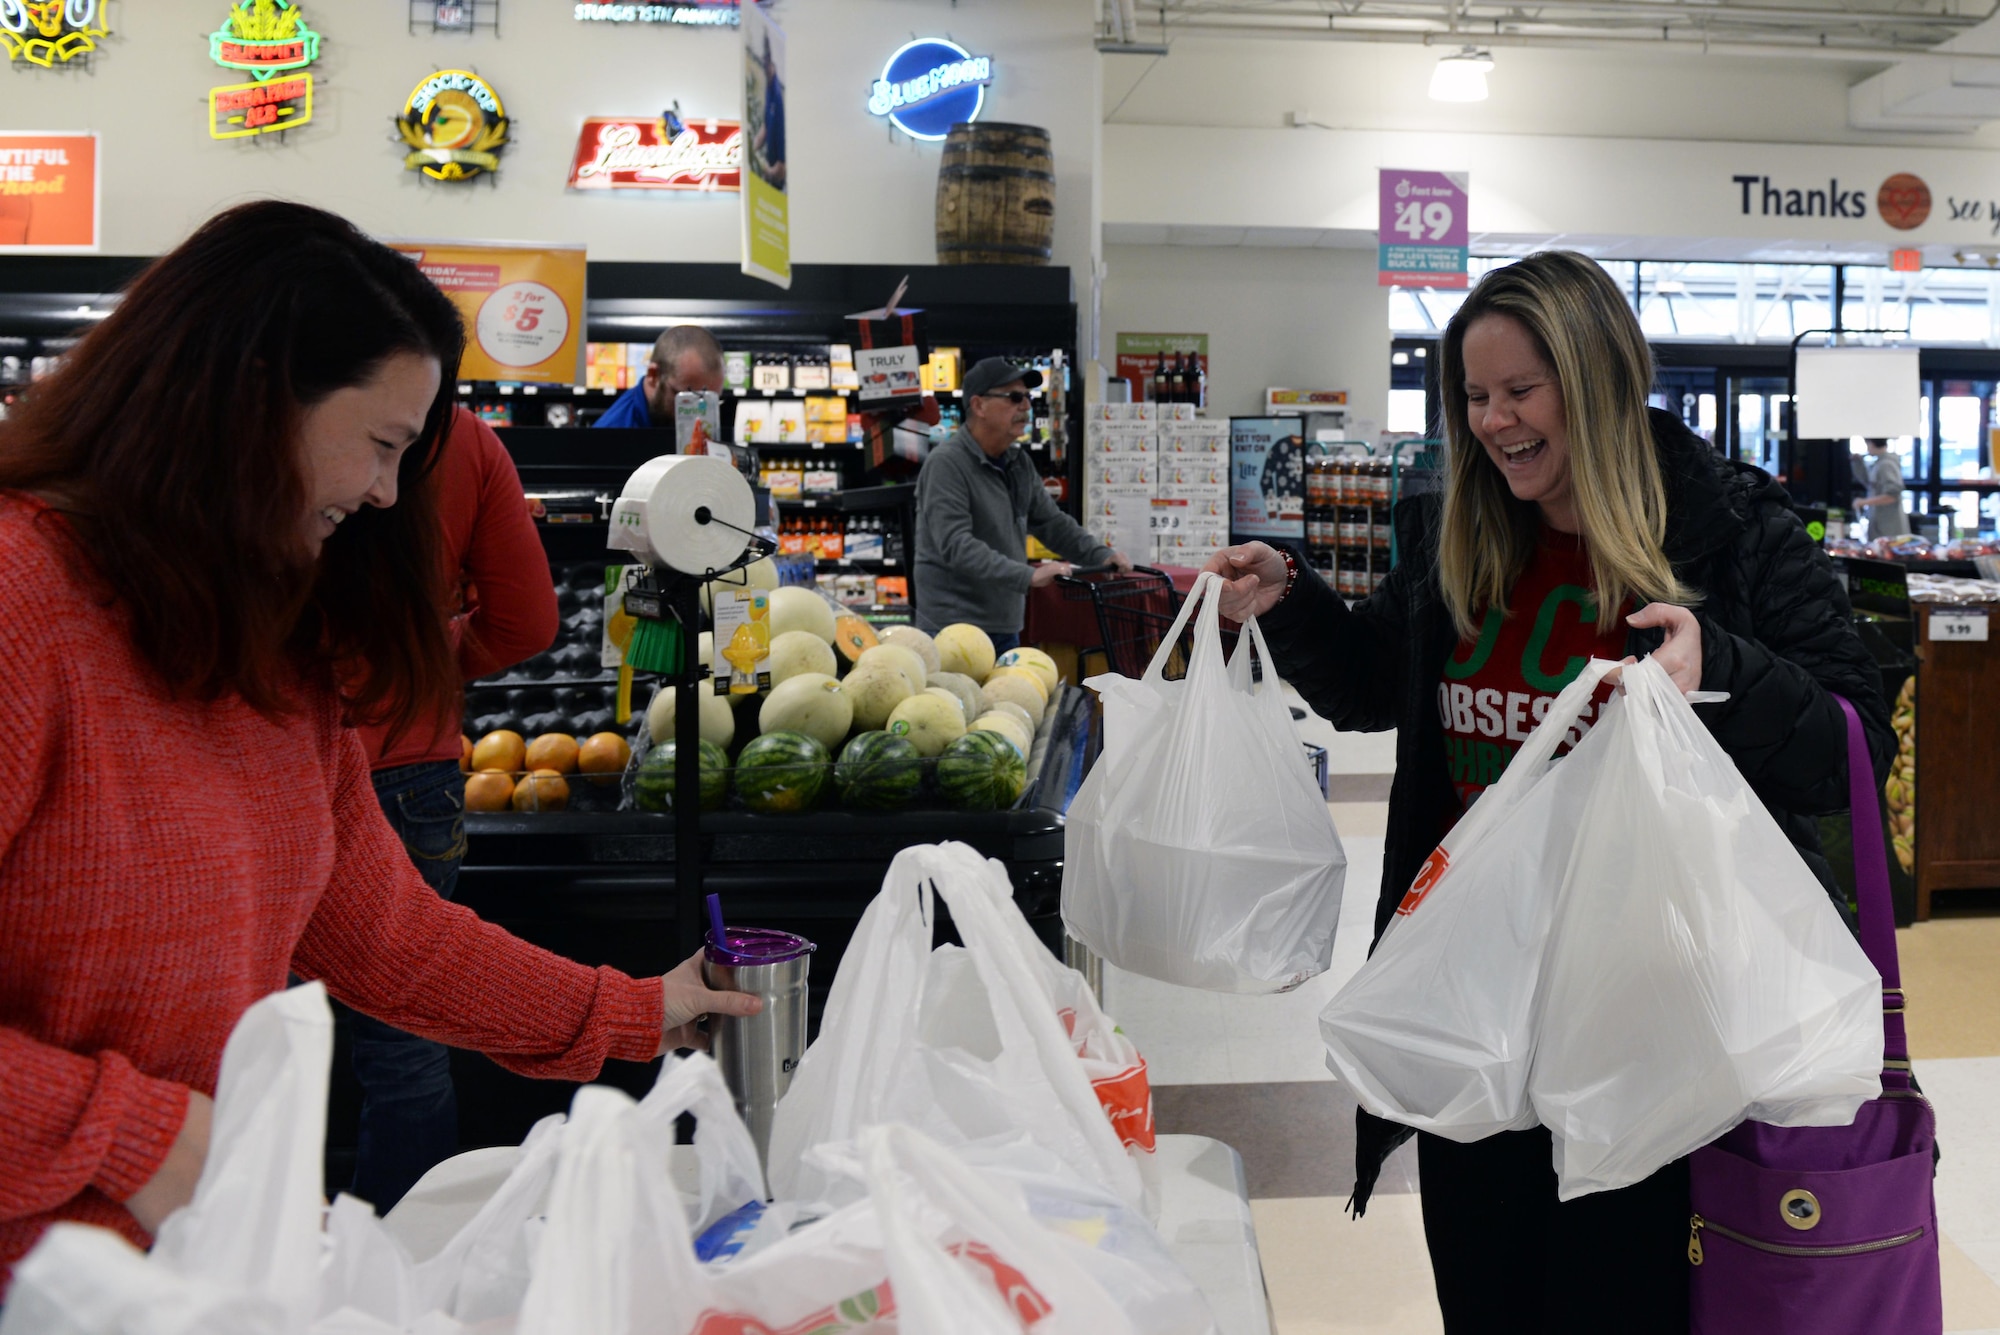 Lynell Rice Brinkworth, a shopper at the Family Fare Super Market in Rapid City, S.D., donates cookies to Jennifer Bassett, the Ellsworth Spouse’s Club Socials chairperson, Dec. 7, 2019. During the fundraiser, community members donated either pre-packaged cookies or provided a monetary donation for the Ellsworth Air Force Base Cookie Drive, an annual event for dormitory Airmen during the holidays. (U.S. Air Force photo by Airman Quentin K. Marx)